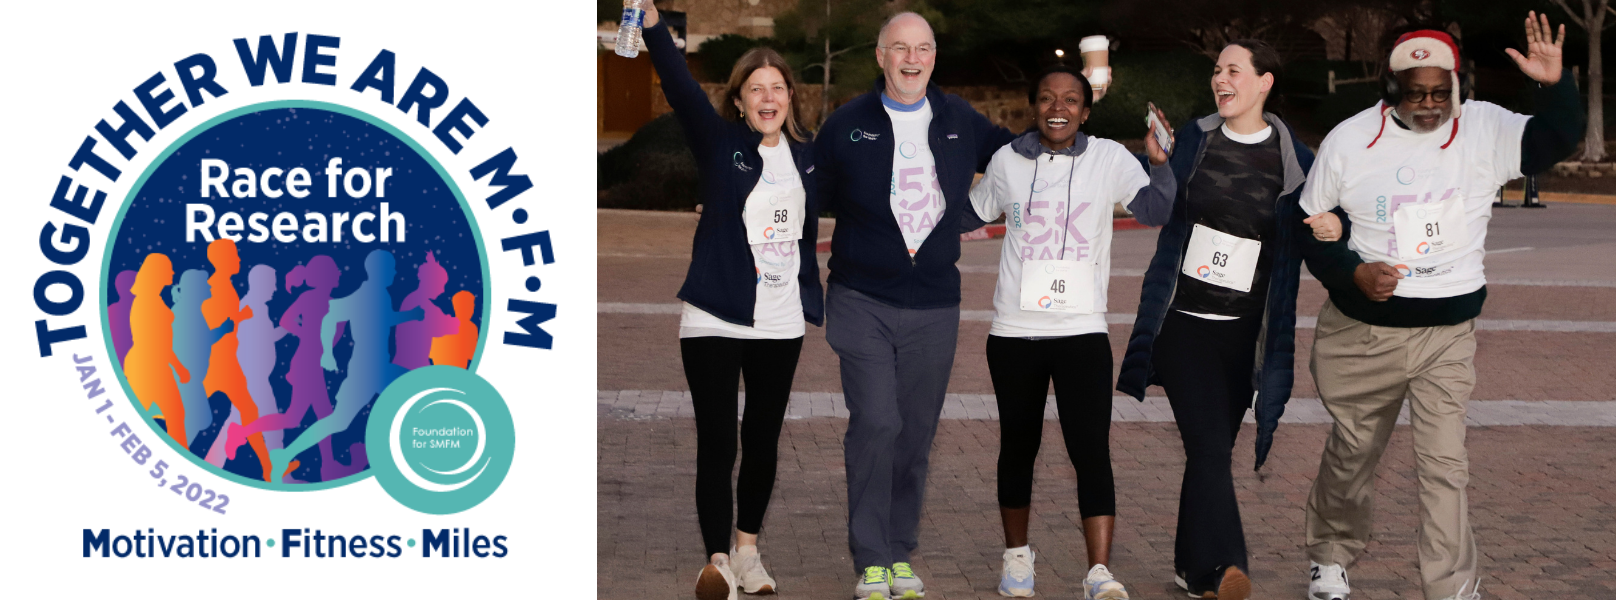 The Race for Research: A Virtual Race to Support the Foundation for SMFM